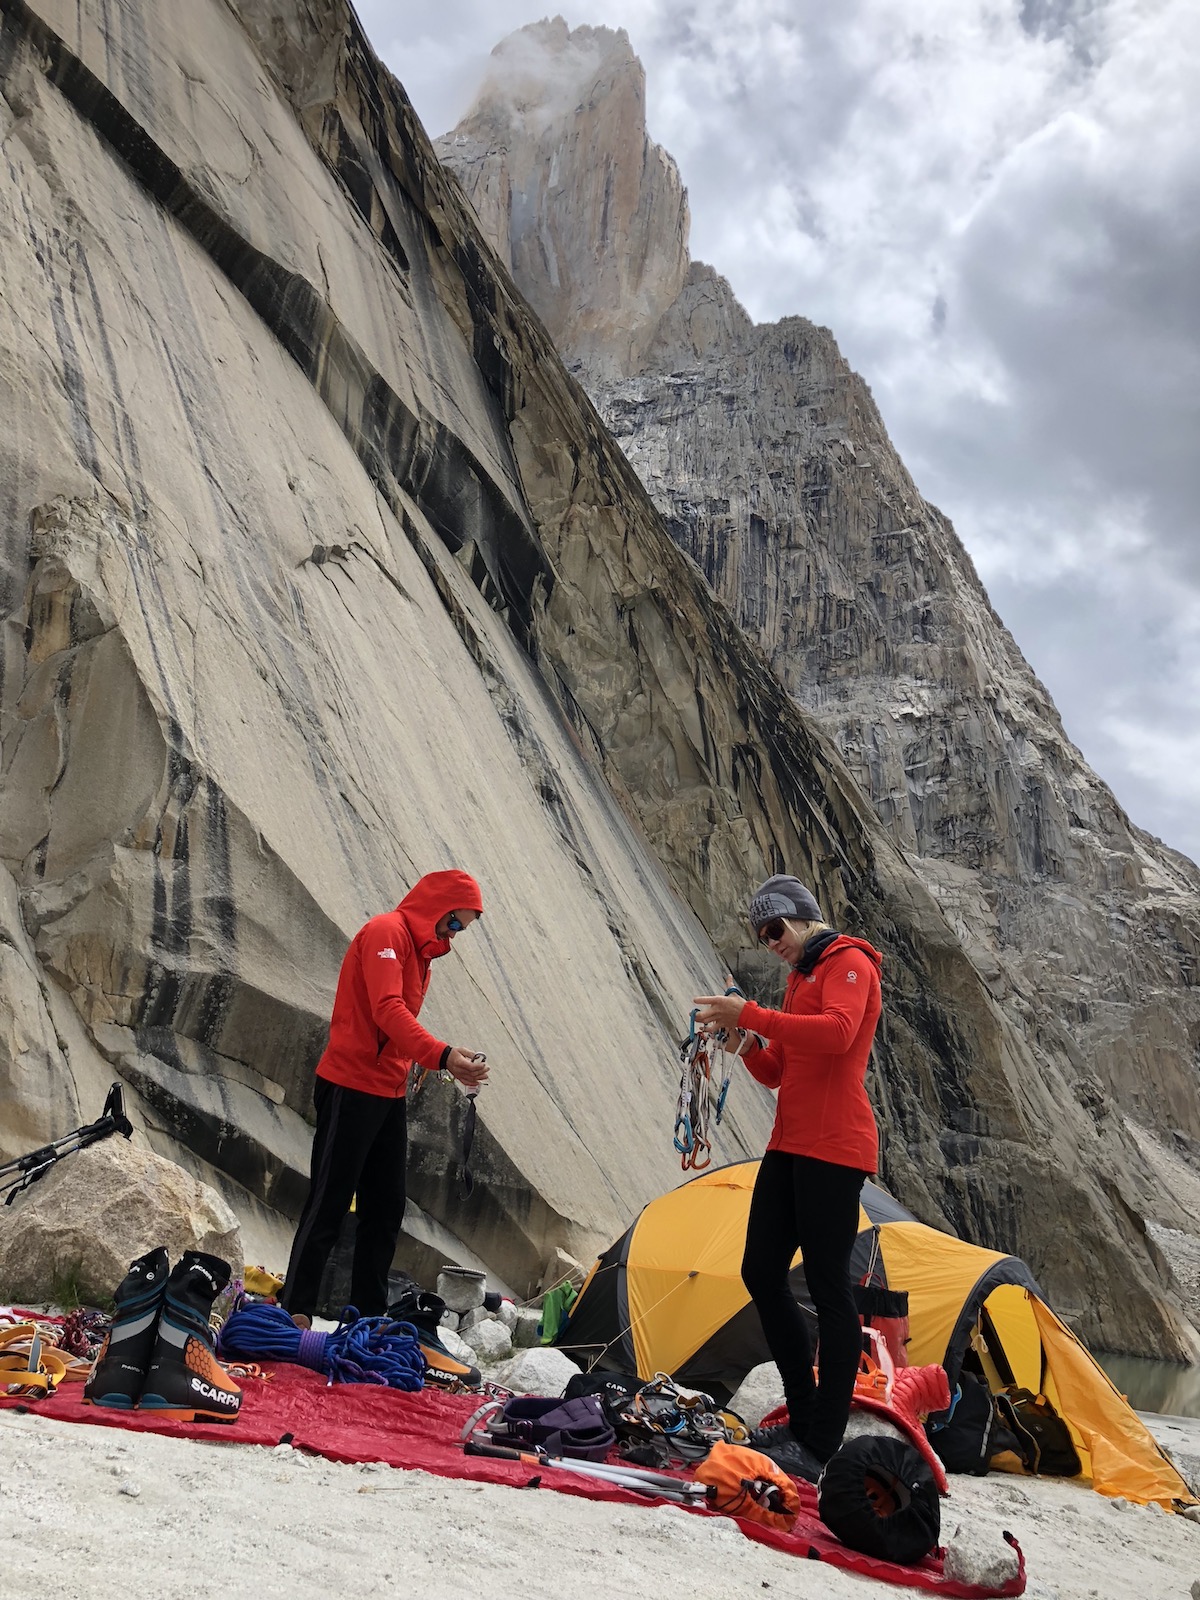 David Allfrey and Anna Pfaff sort gear to carry to their high camp (5330m) below the Trango tower and Great Trango tower. [Photo] Andres Marin